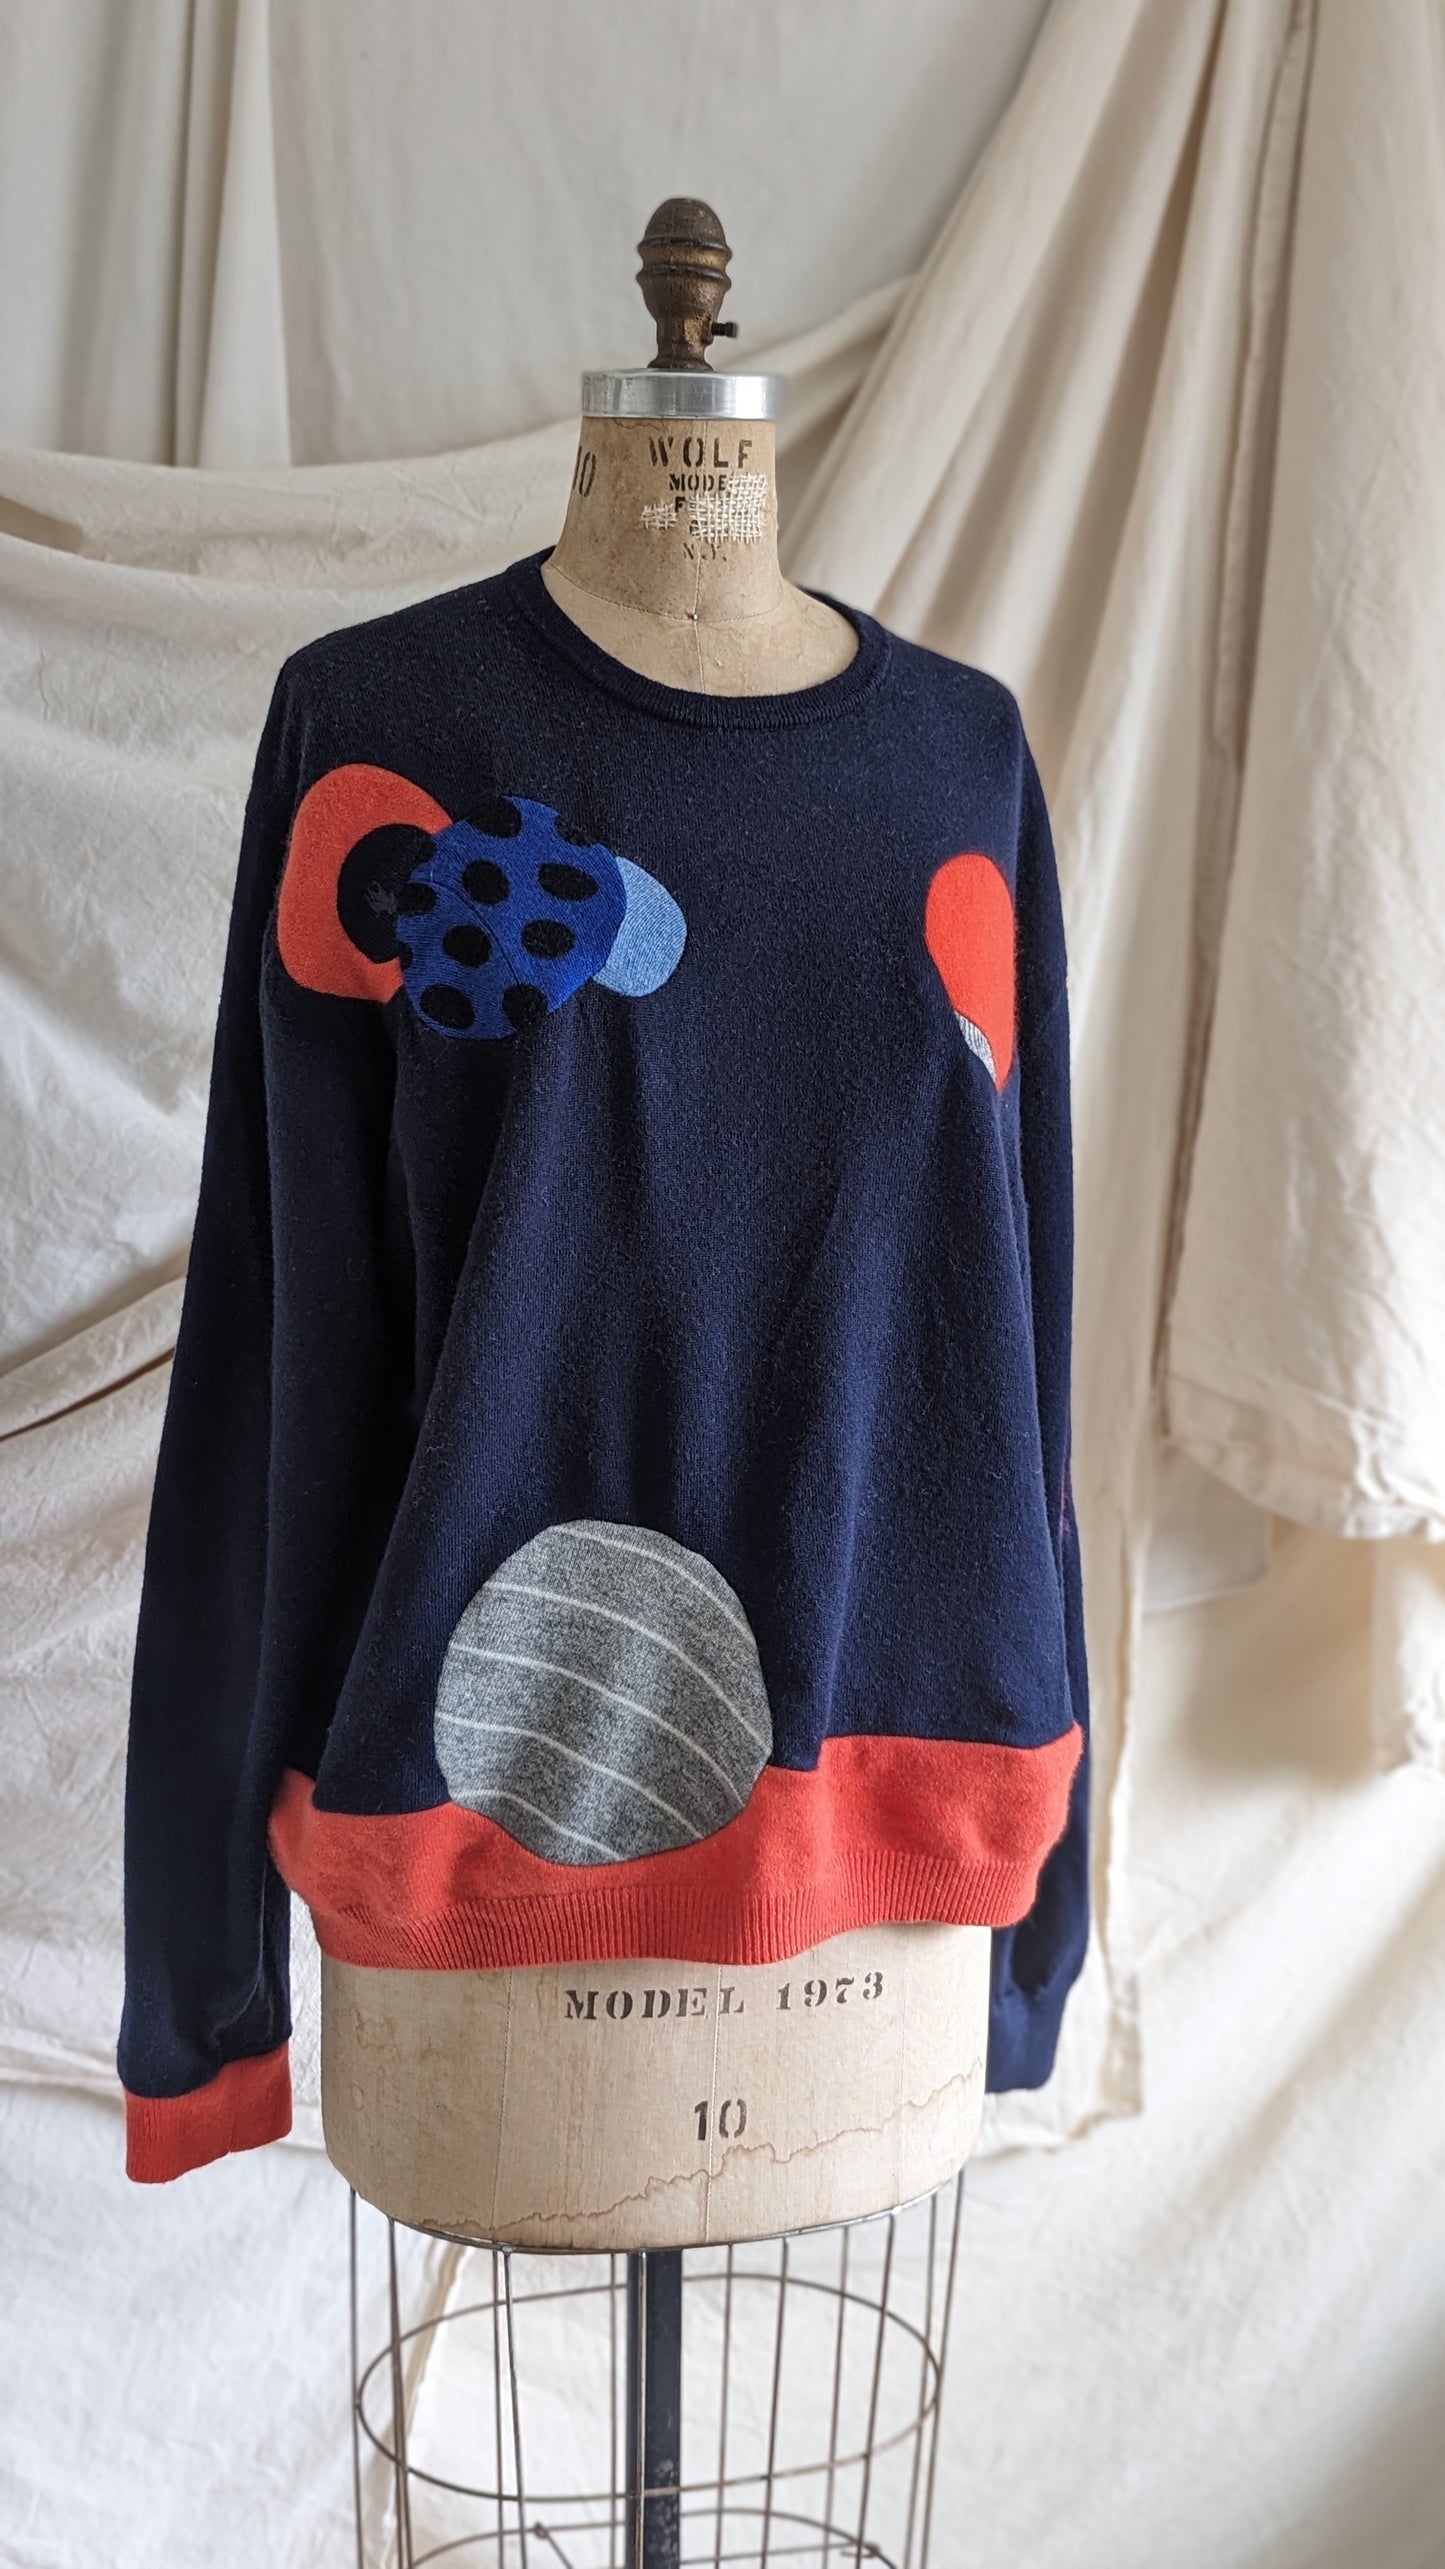 Abstract Art Patched Upcycled Ralph Lauren Merino Wool & Cashmere Sweater L-2X #ART25